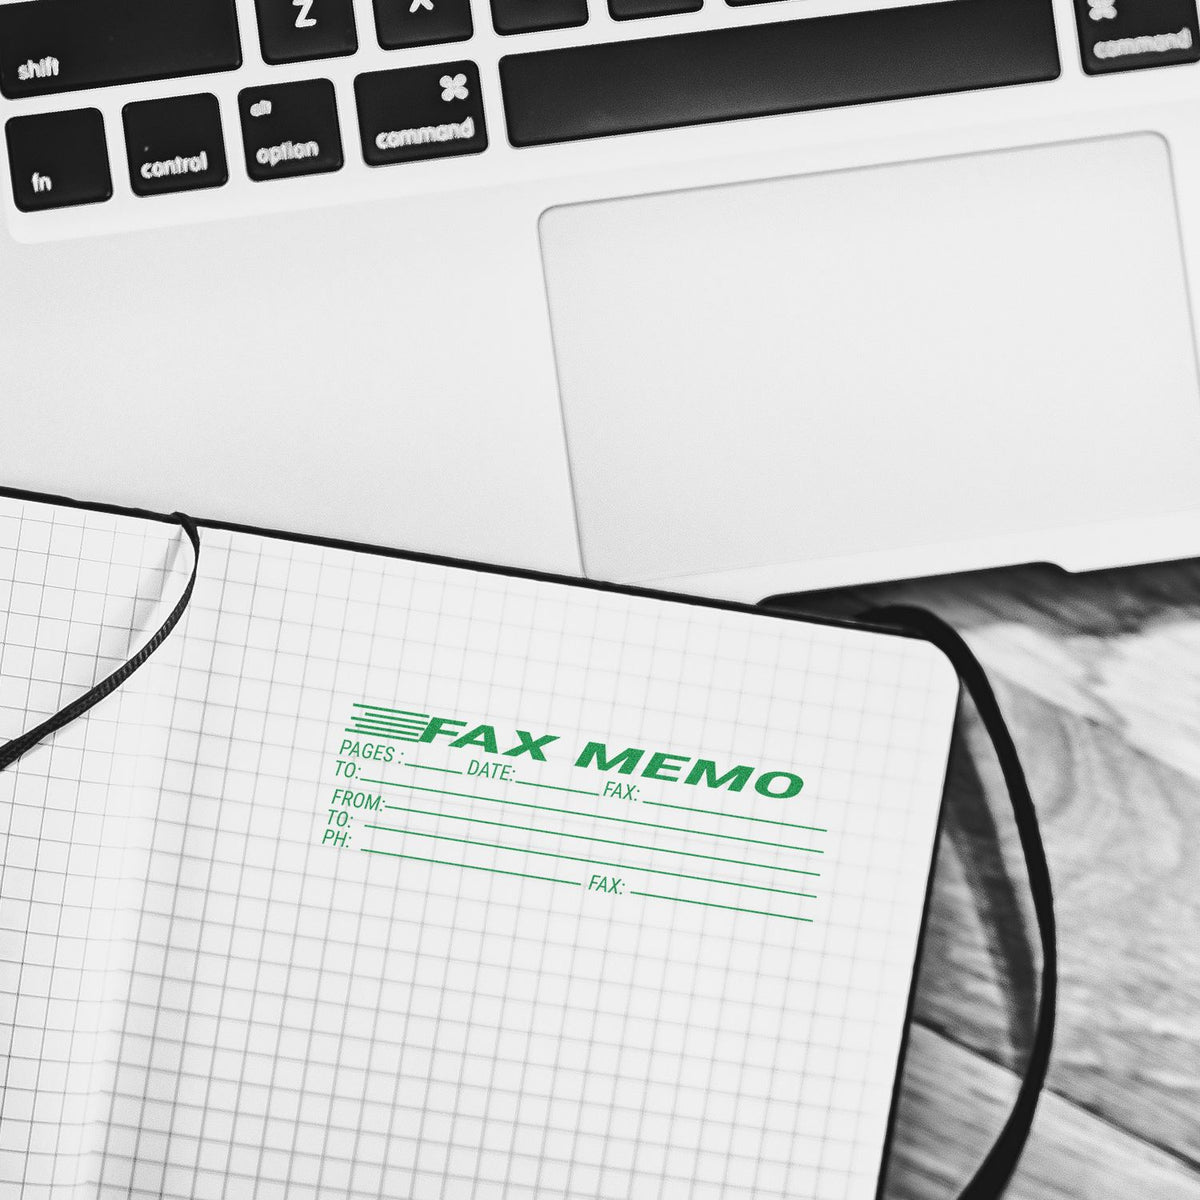 Self-Inking Fax Memo Stamp In Use